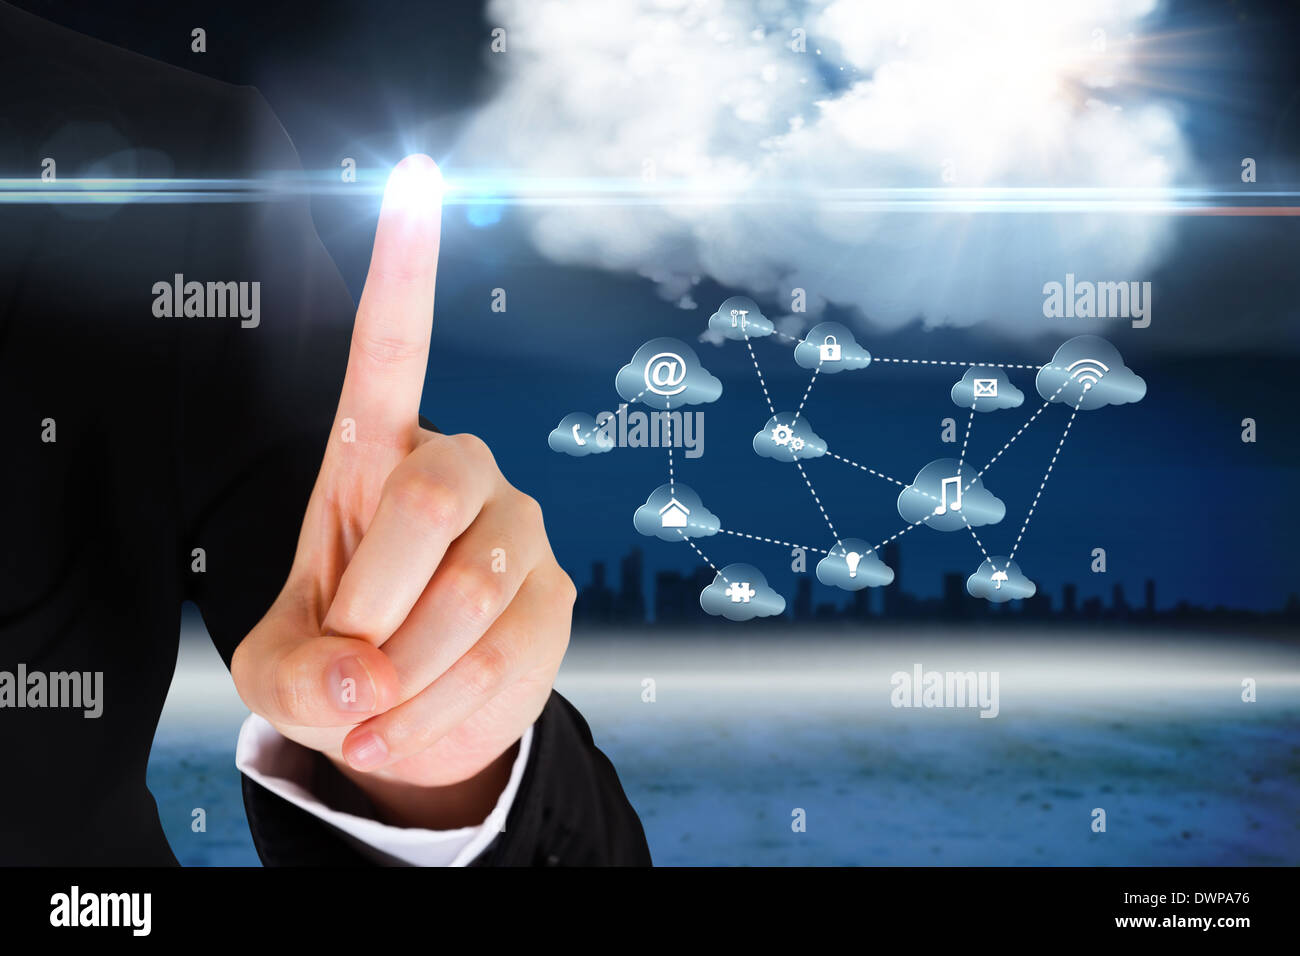 Finger pointing to cloud graphic with app icons Stock Photo